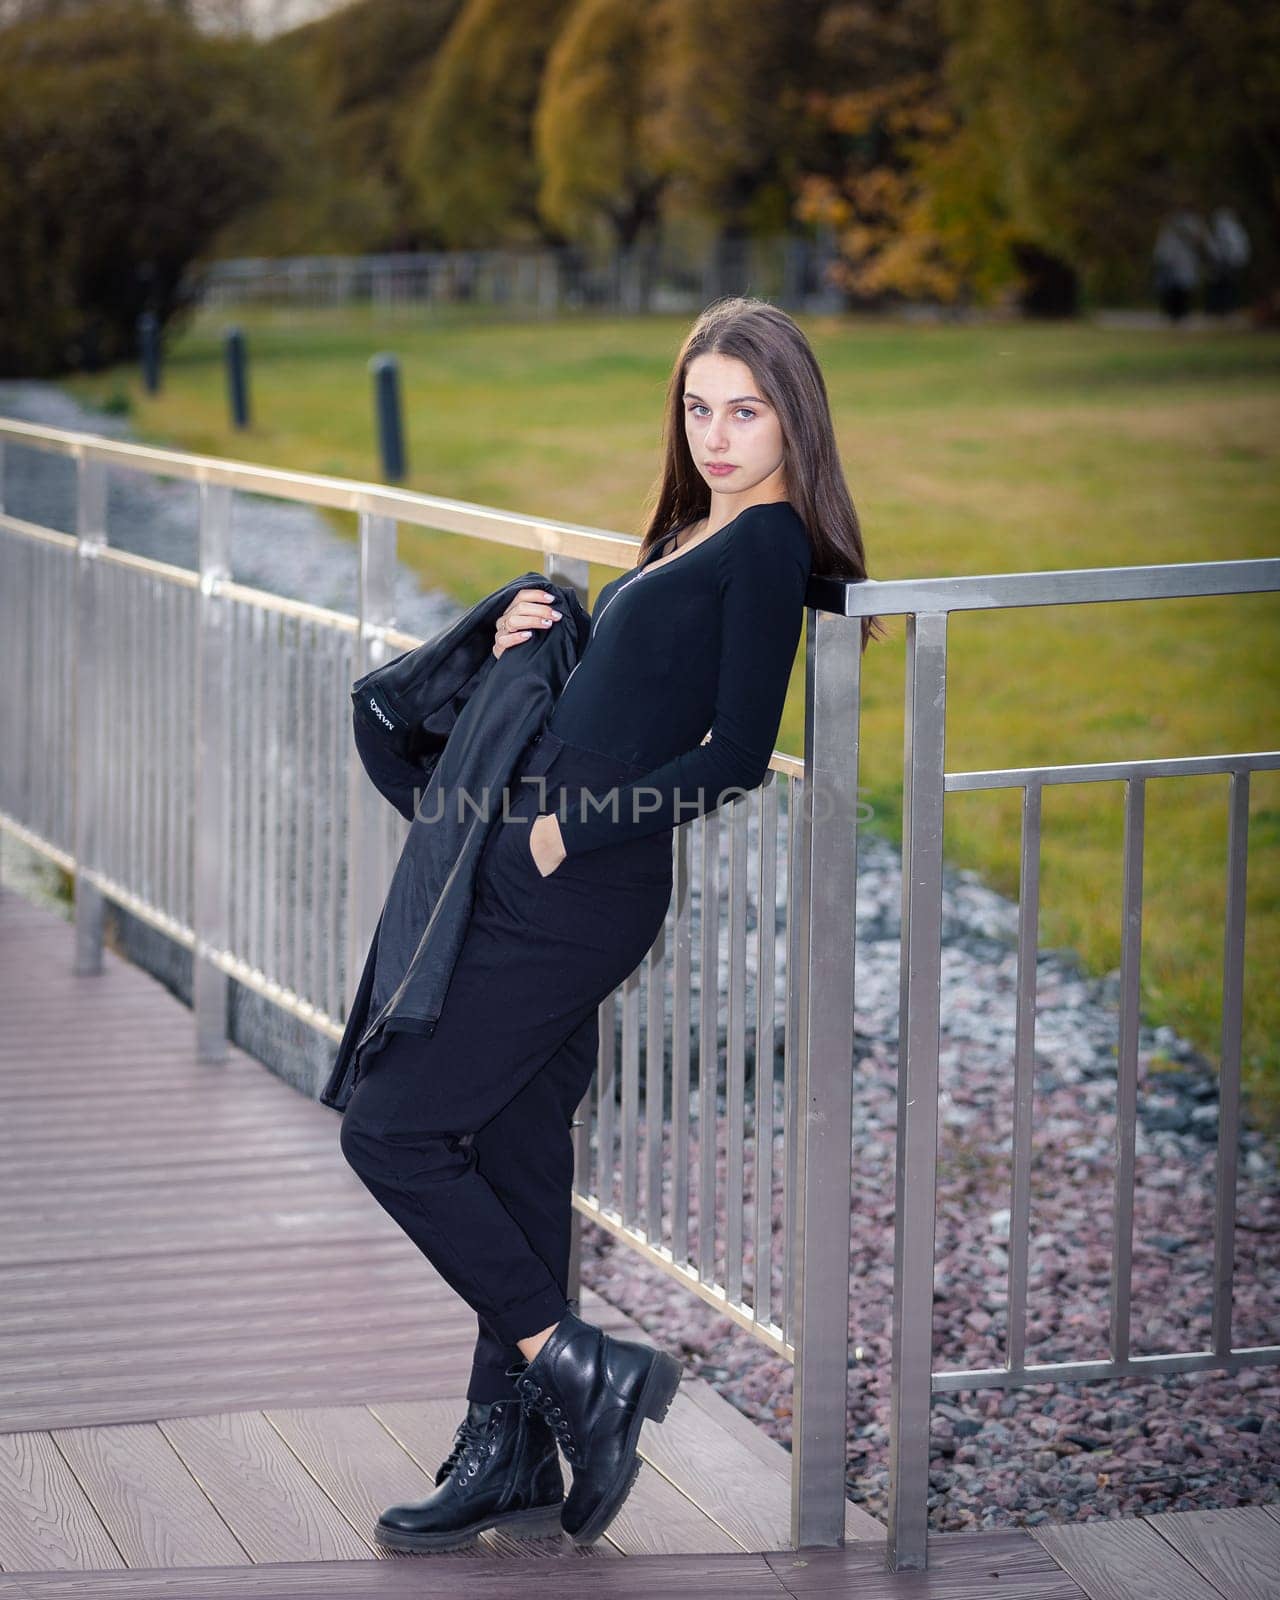 A girl poses on a bridge in a city park. by Yurich32